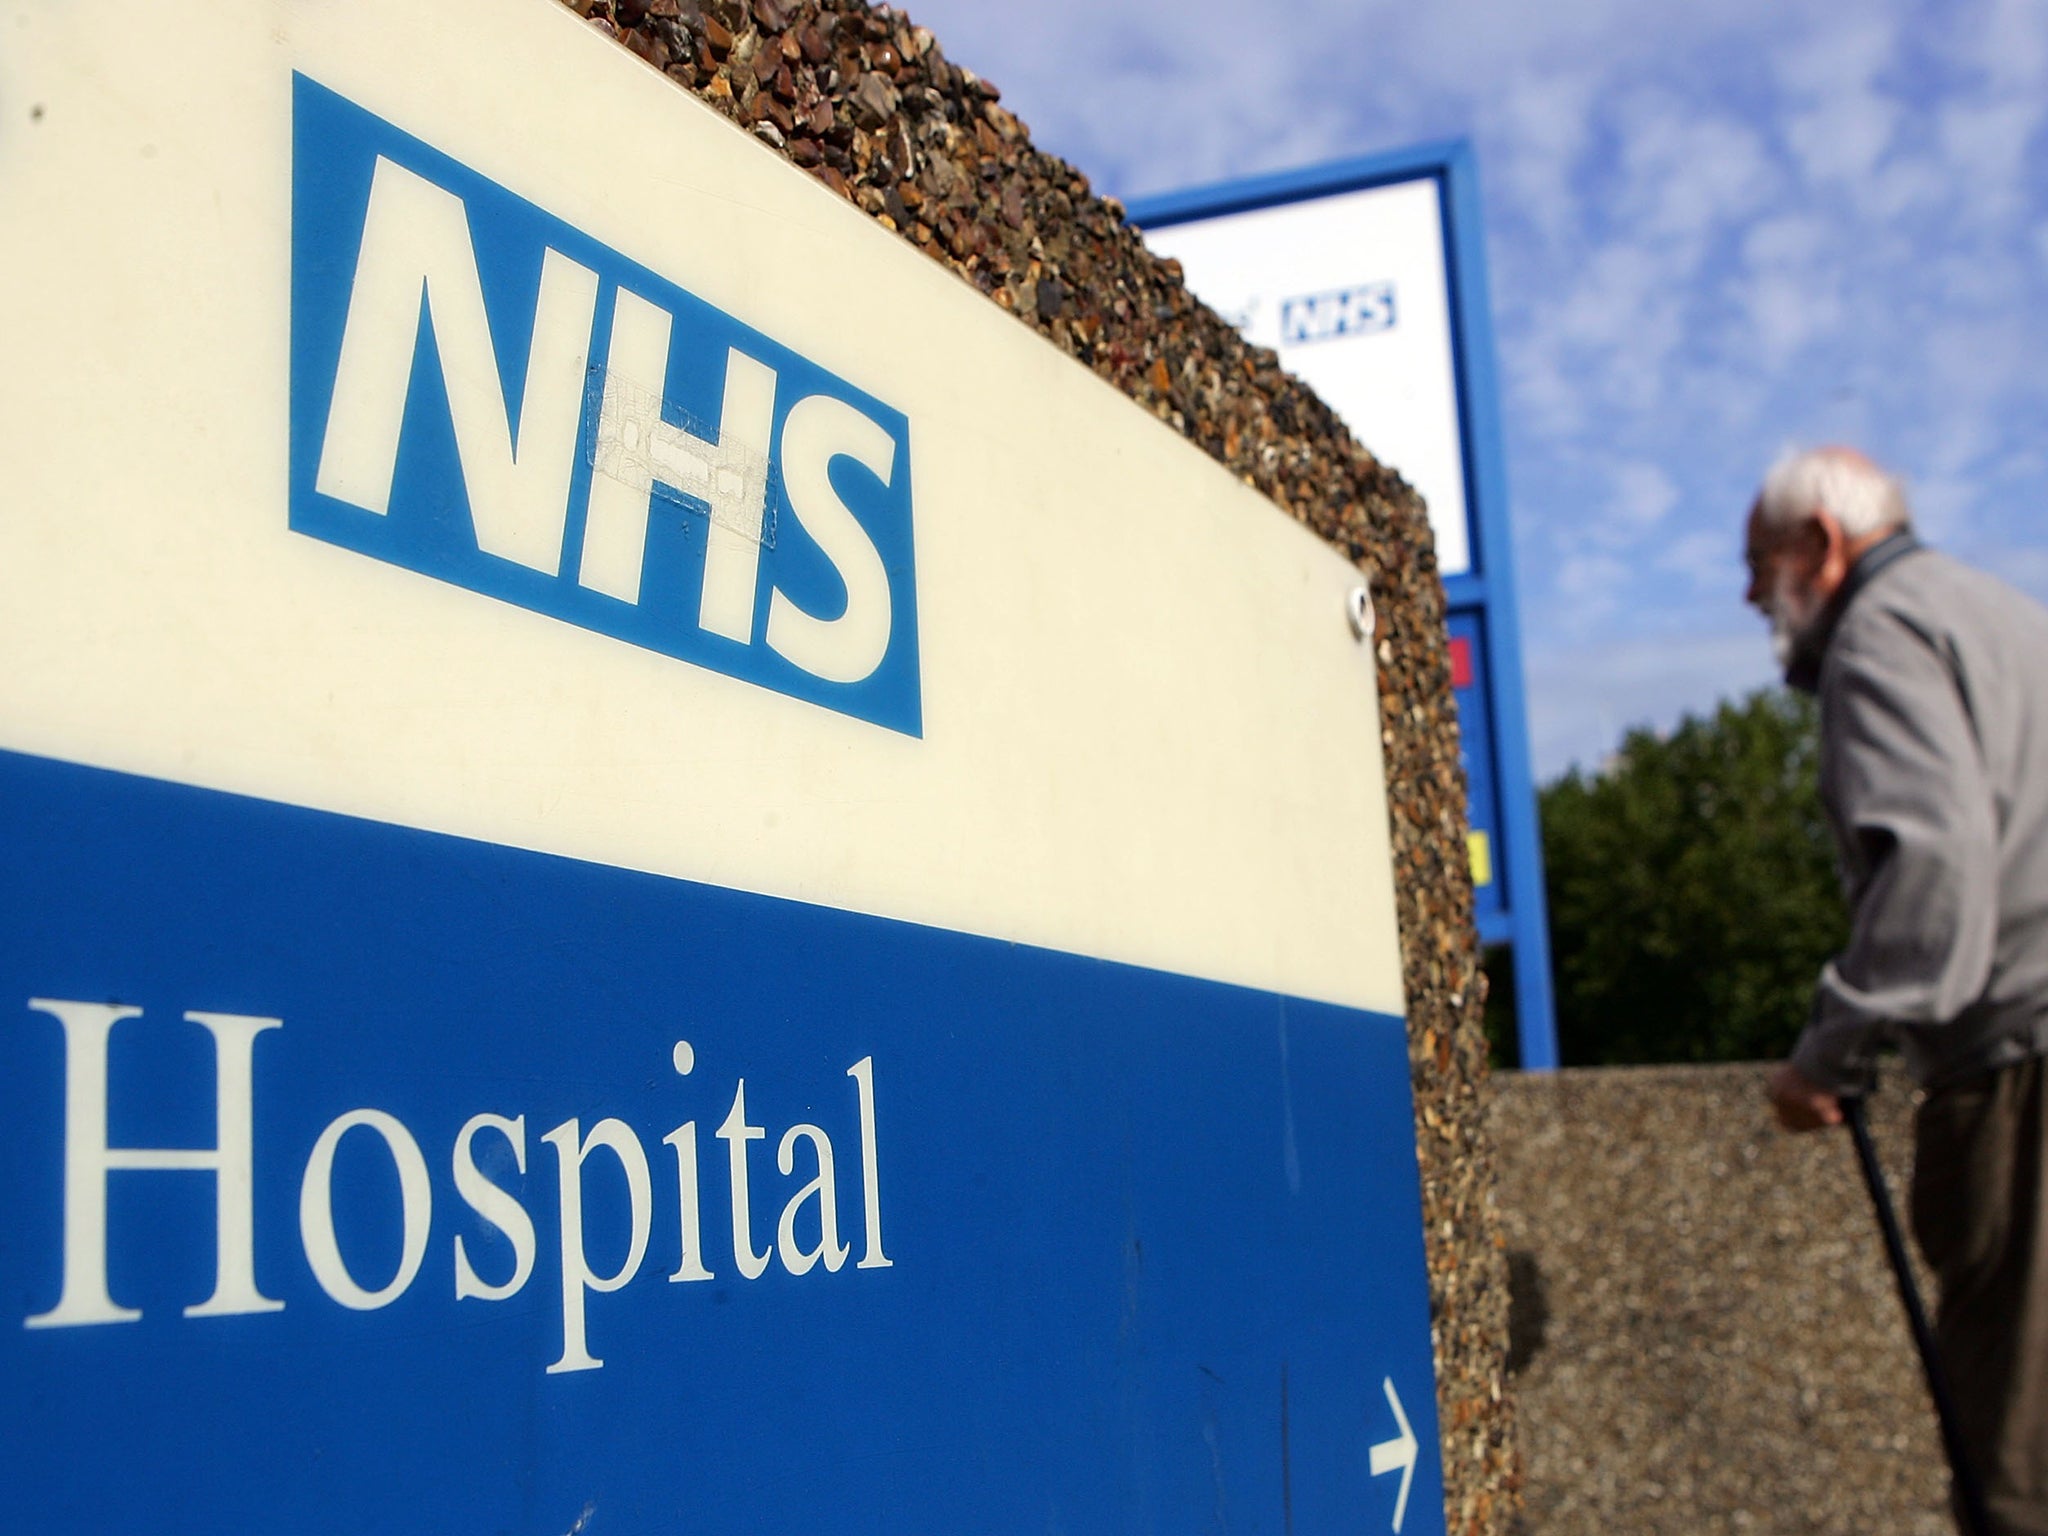 Nine other NHS trusts have been placed in special measures following inspections by the Care Quality Commission